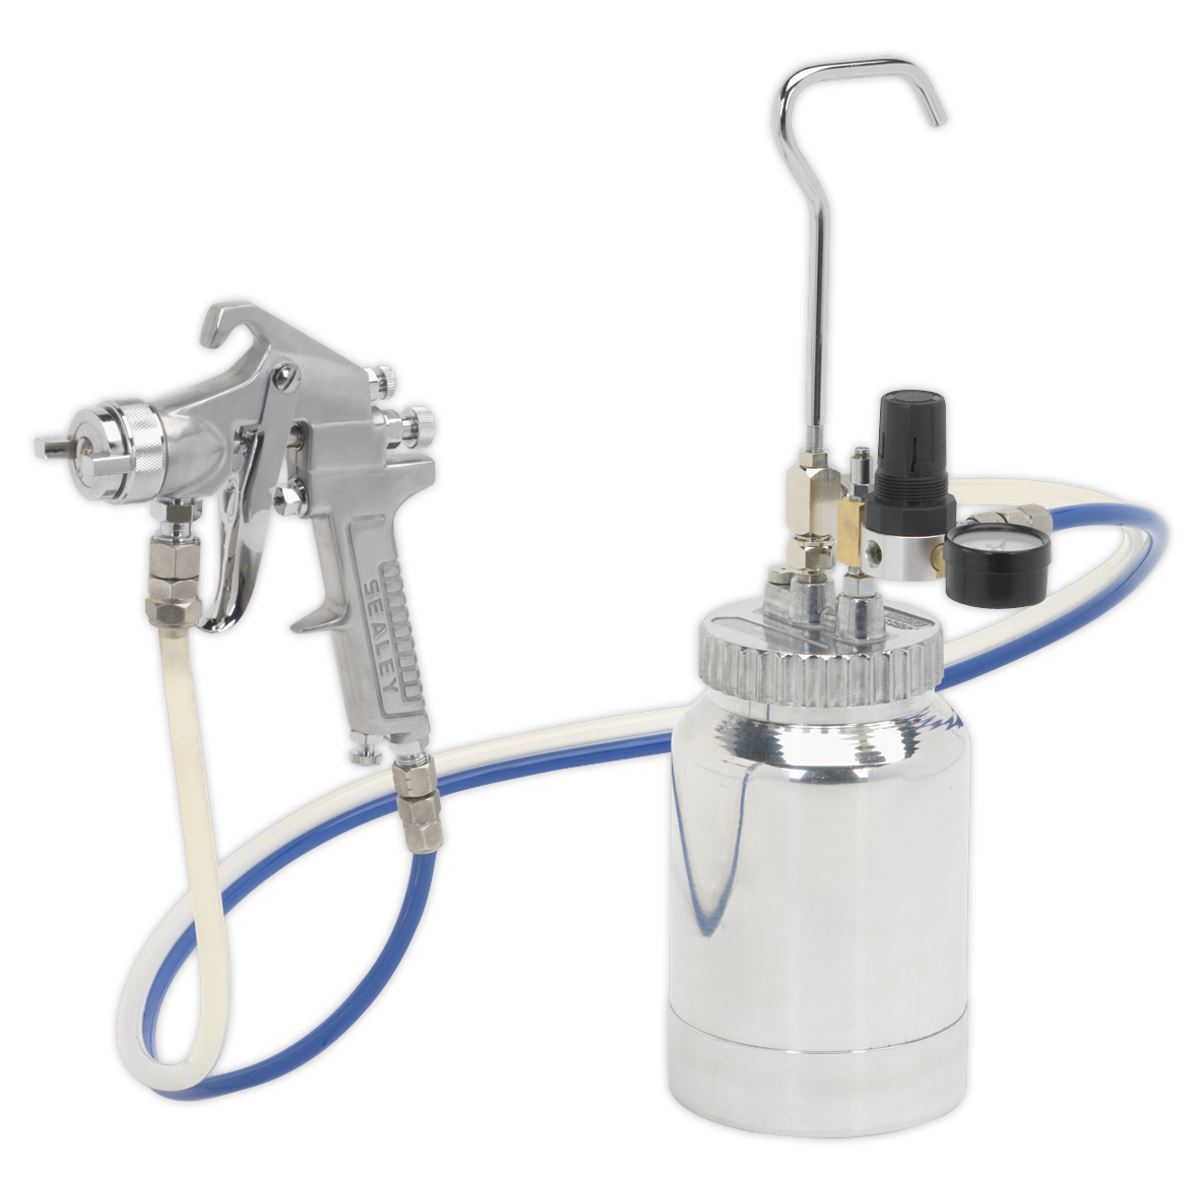 Sealey Pressure Pot System with Spray Gun & Hoses 1.8mm Set-Up